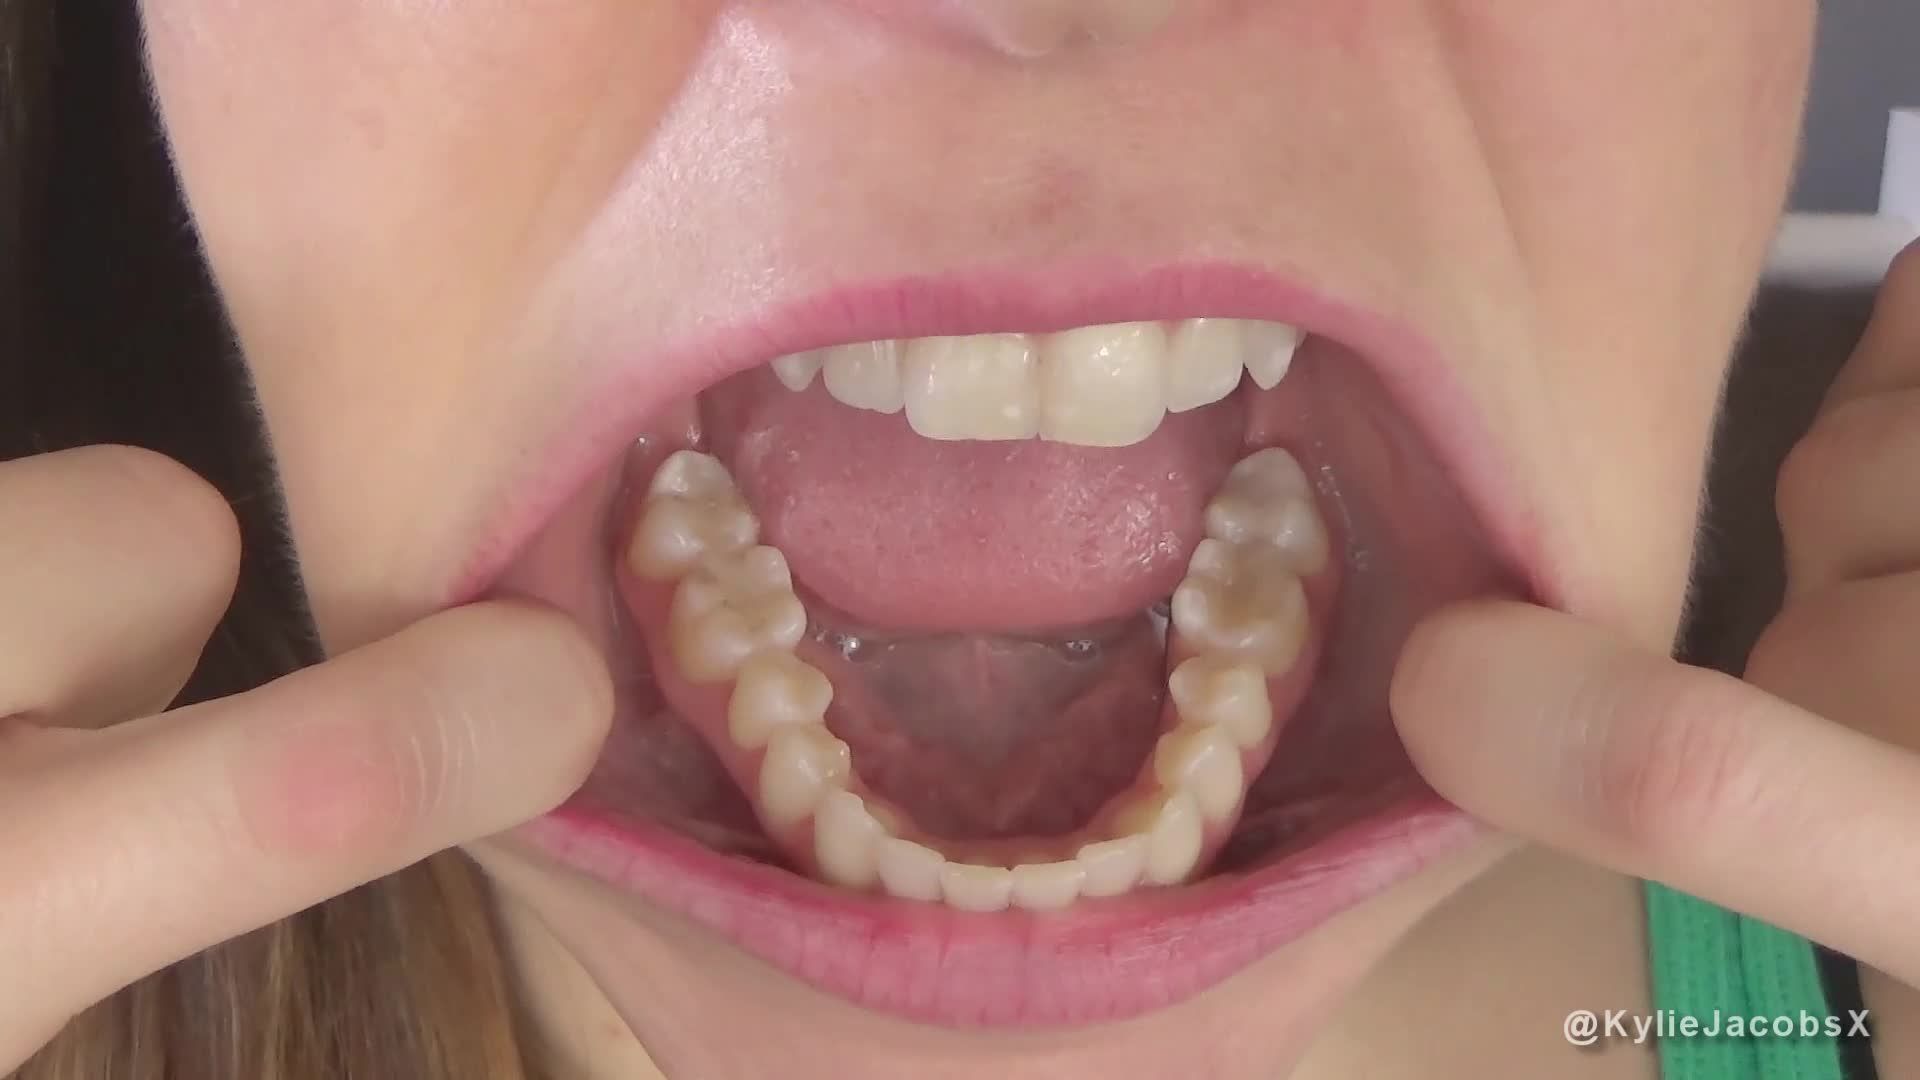 Exploring Kylie's Mouth